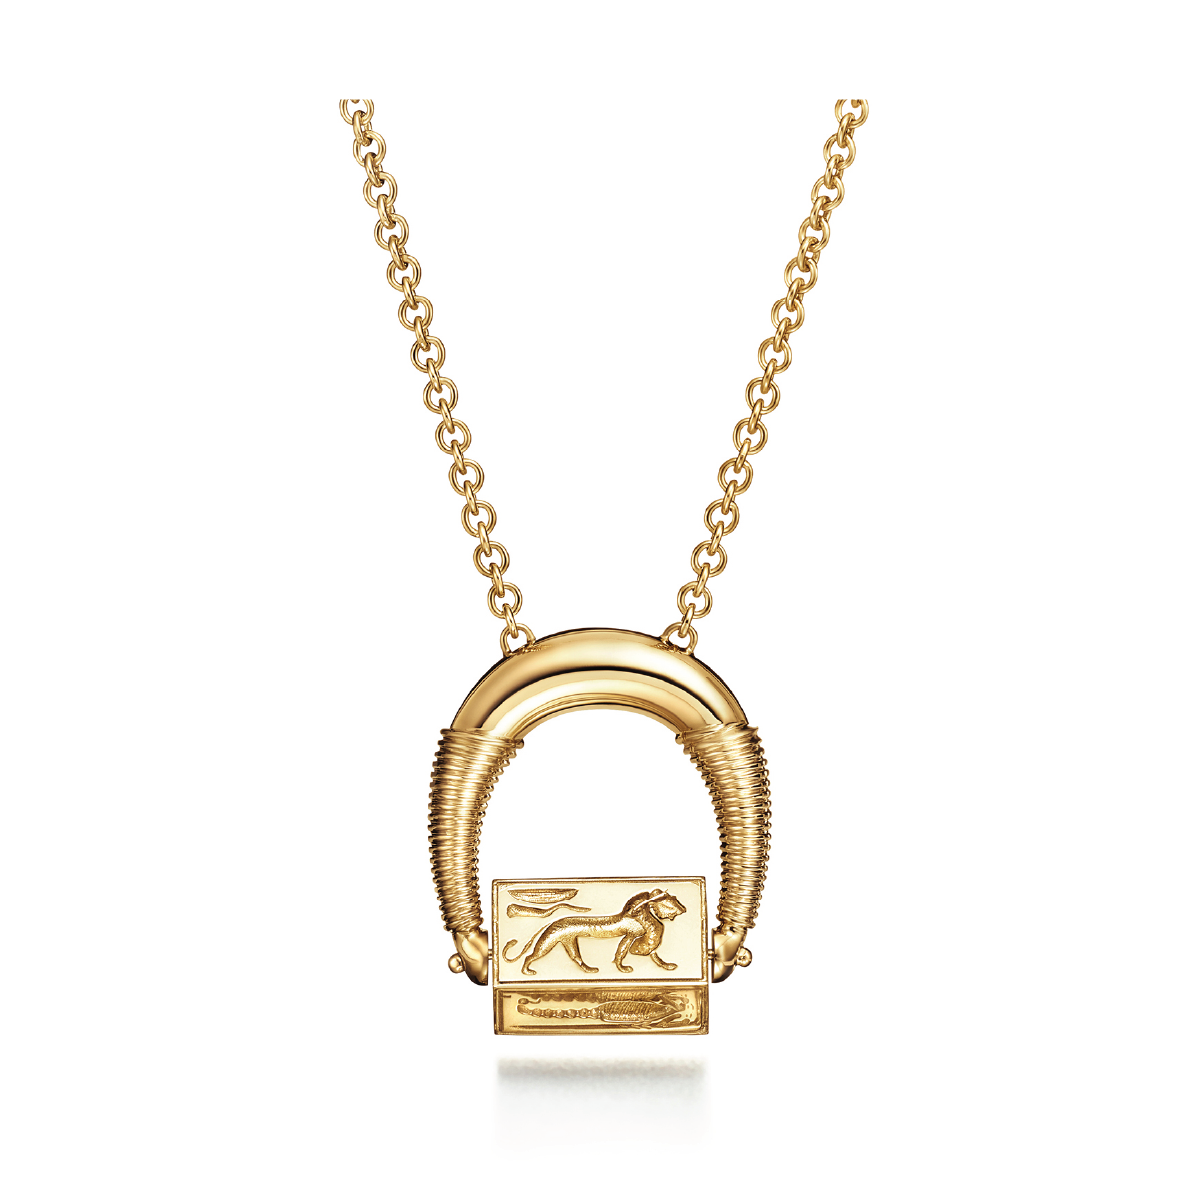 Odyssey Necklace Made with Sustainably Sourced Gold